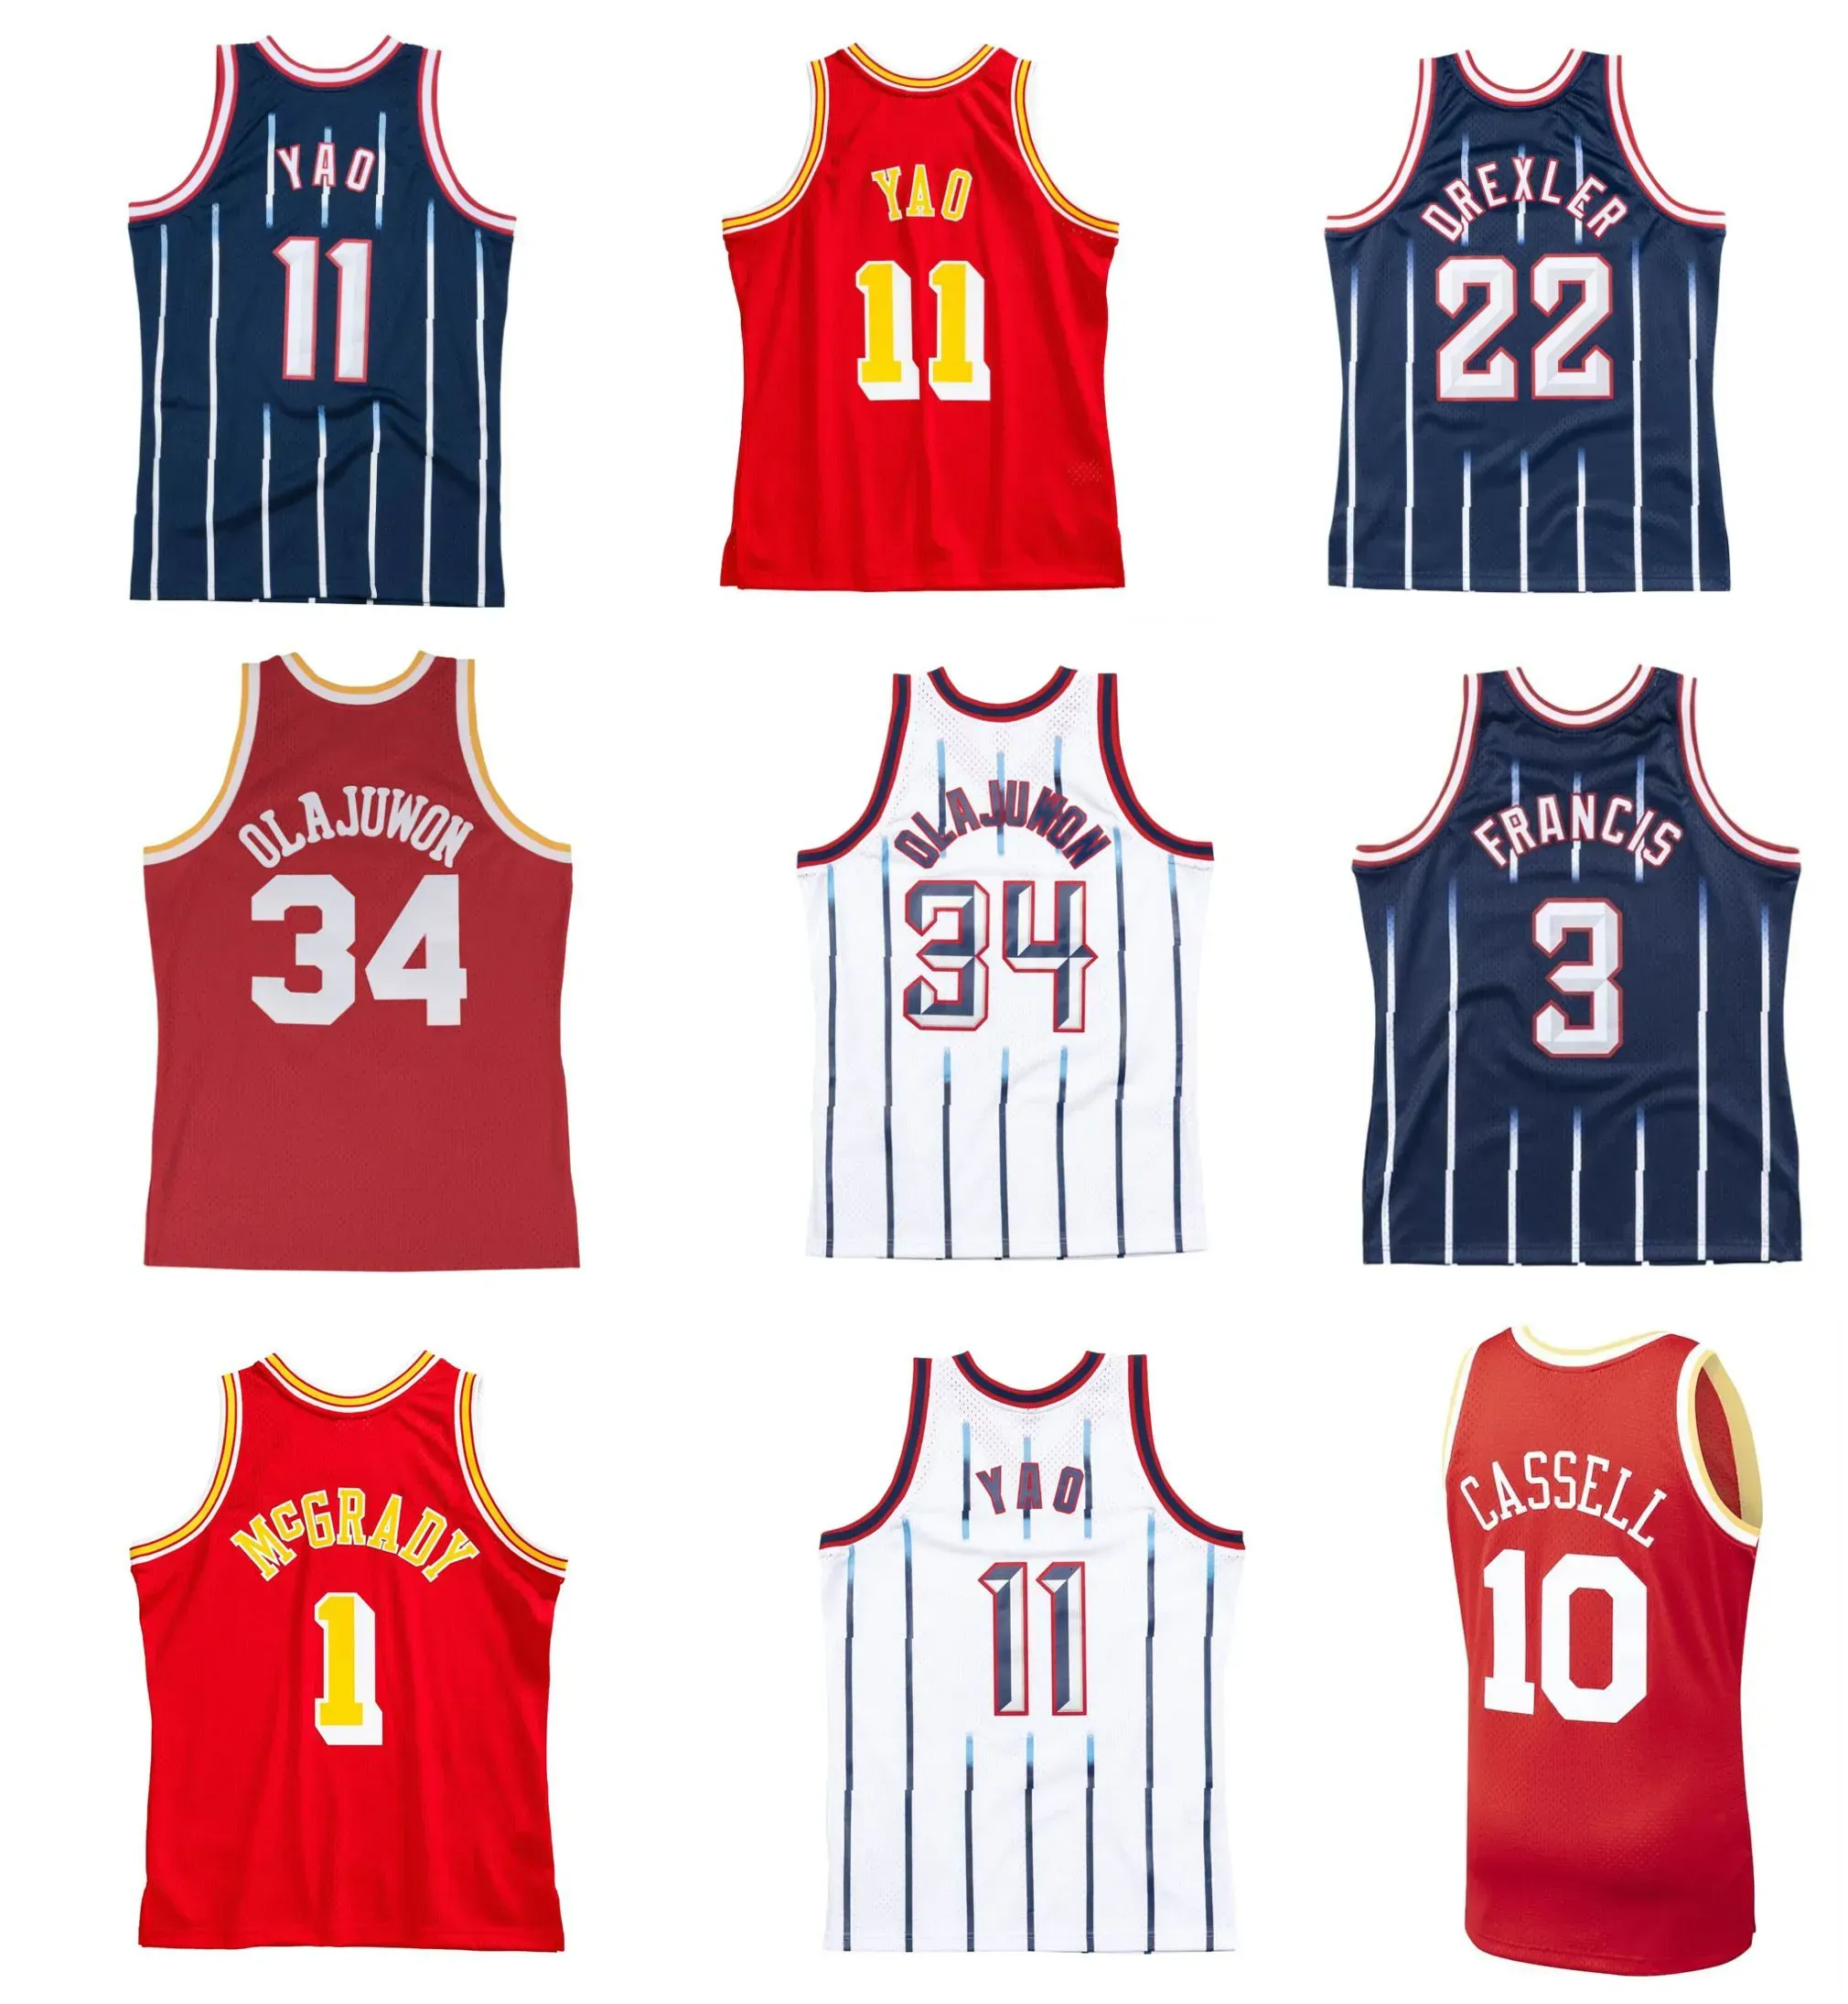 Yao Ming Rocket Basketball Jersey Houstons Hakeem Olajuwon Tracy McGrady Francis Clyde Drexler Cassell Elie Mitchell and Ness Throwback Red Blue White Size S-XXL